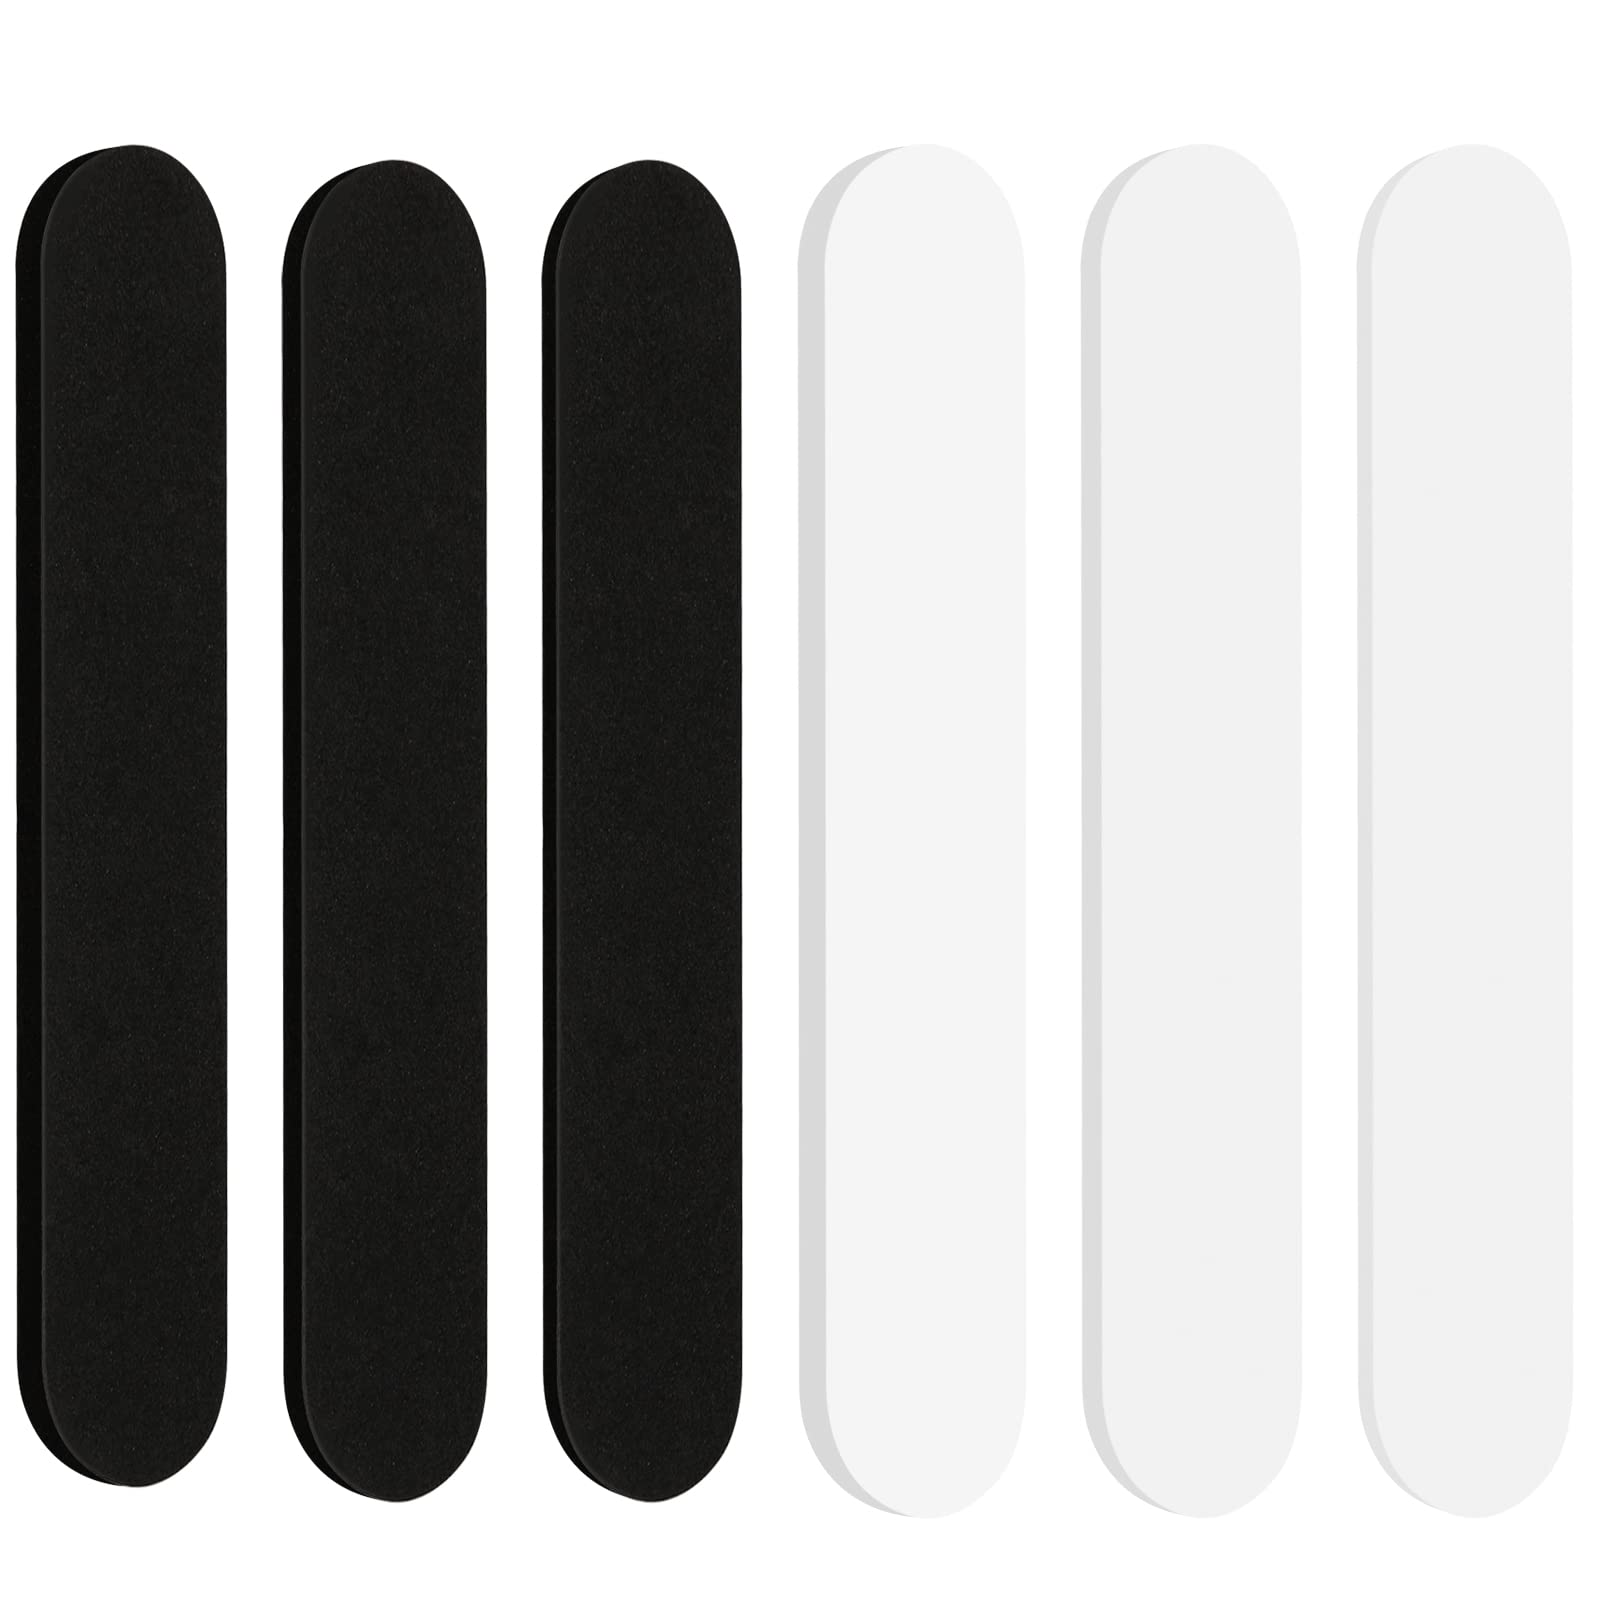 42 PCS Hat Size Reducer, PHSZZ Foam Hat Sizing Tape, Filler Sizer Reducer Insert Adhesive for Hats Cap Sweatband, 3 sizes (3mm 4mm 5mm Black and White)